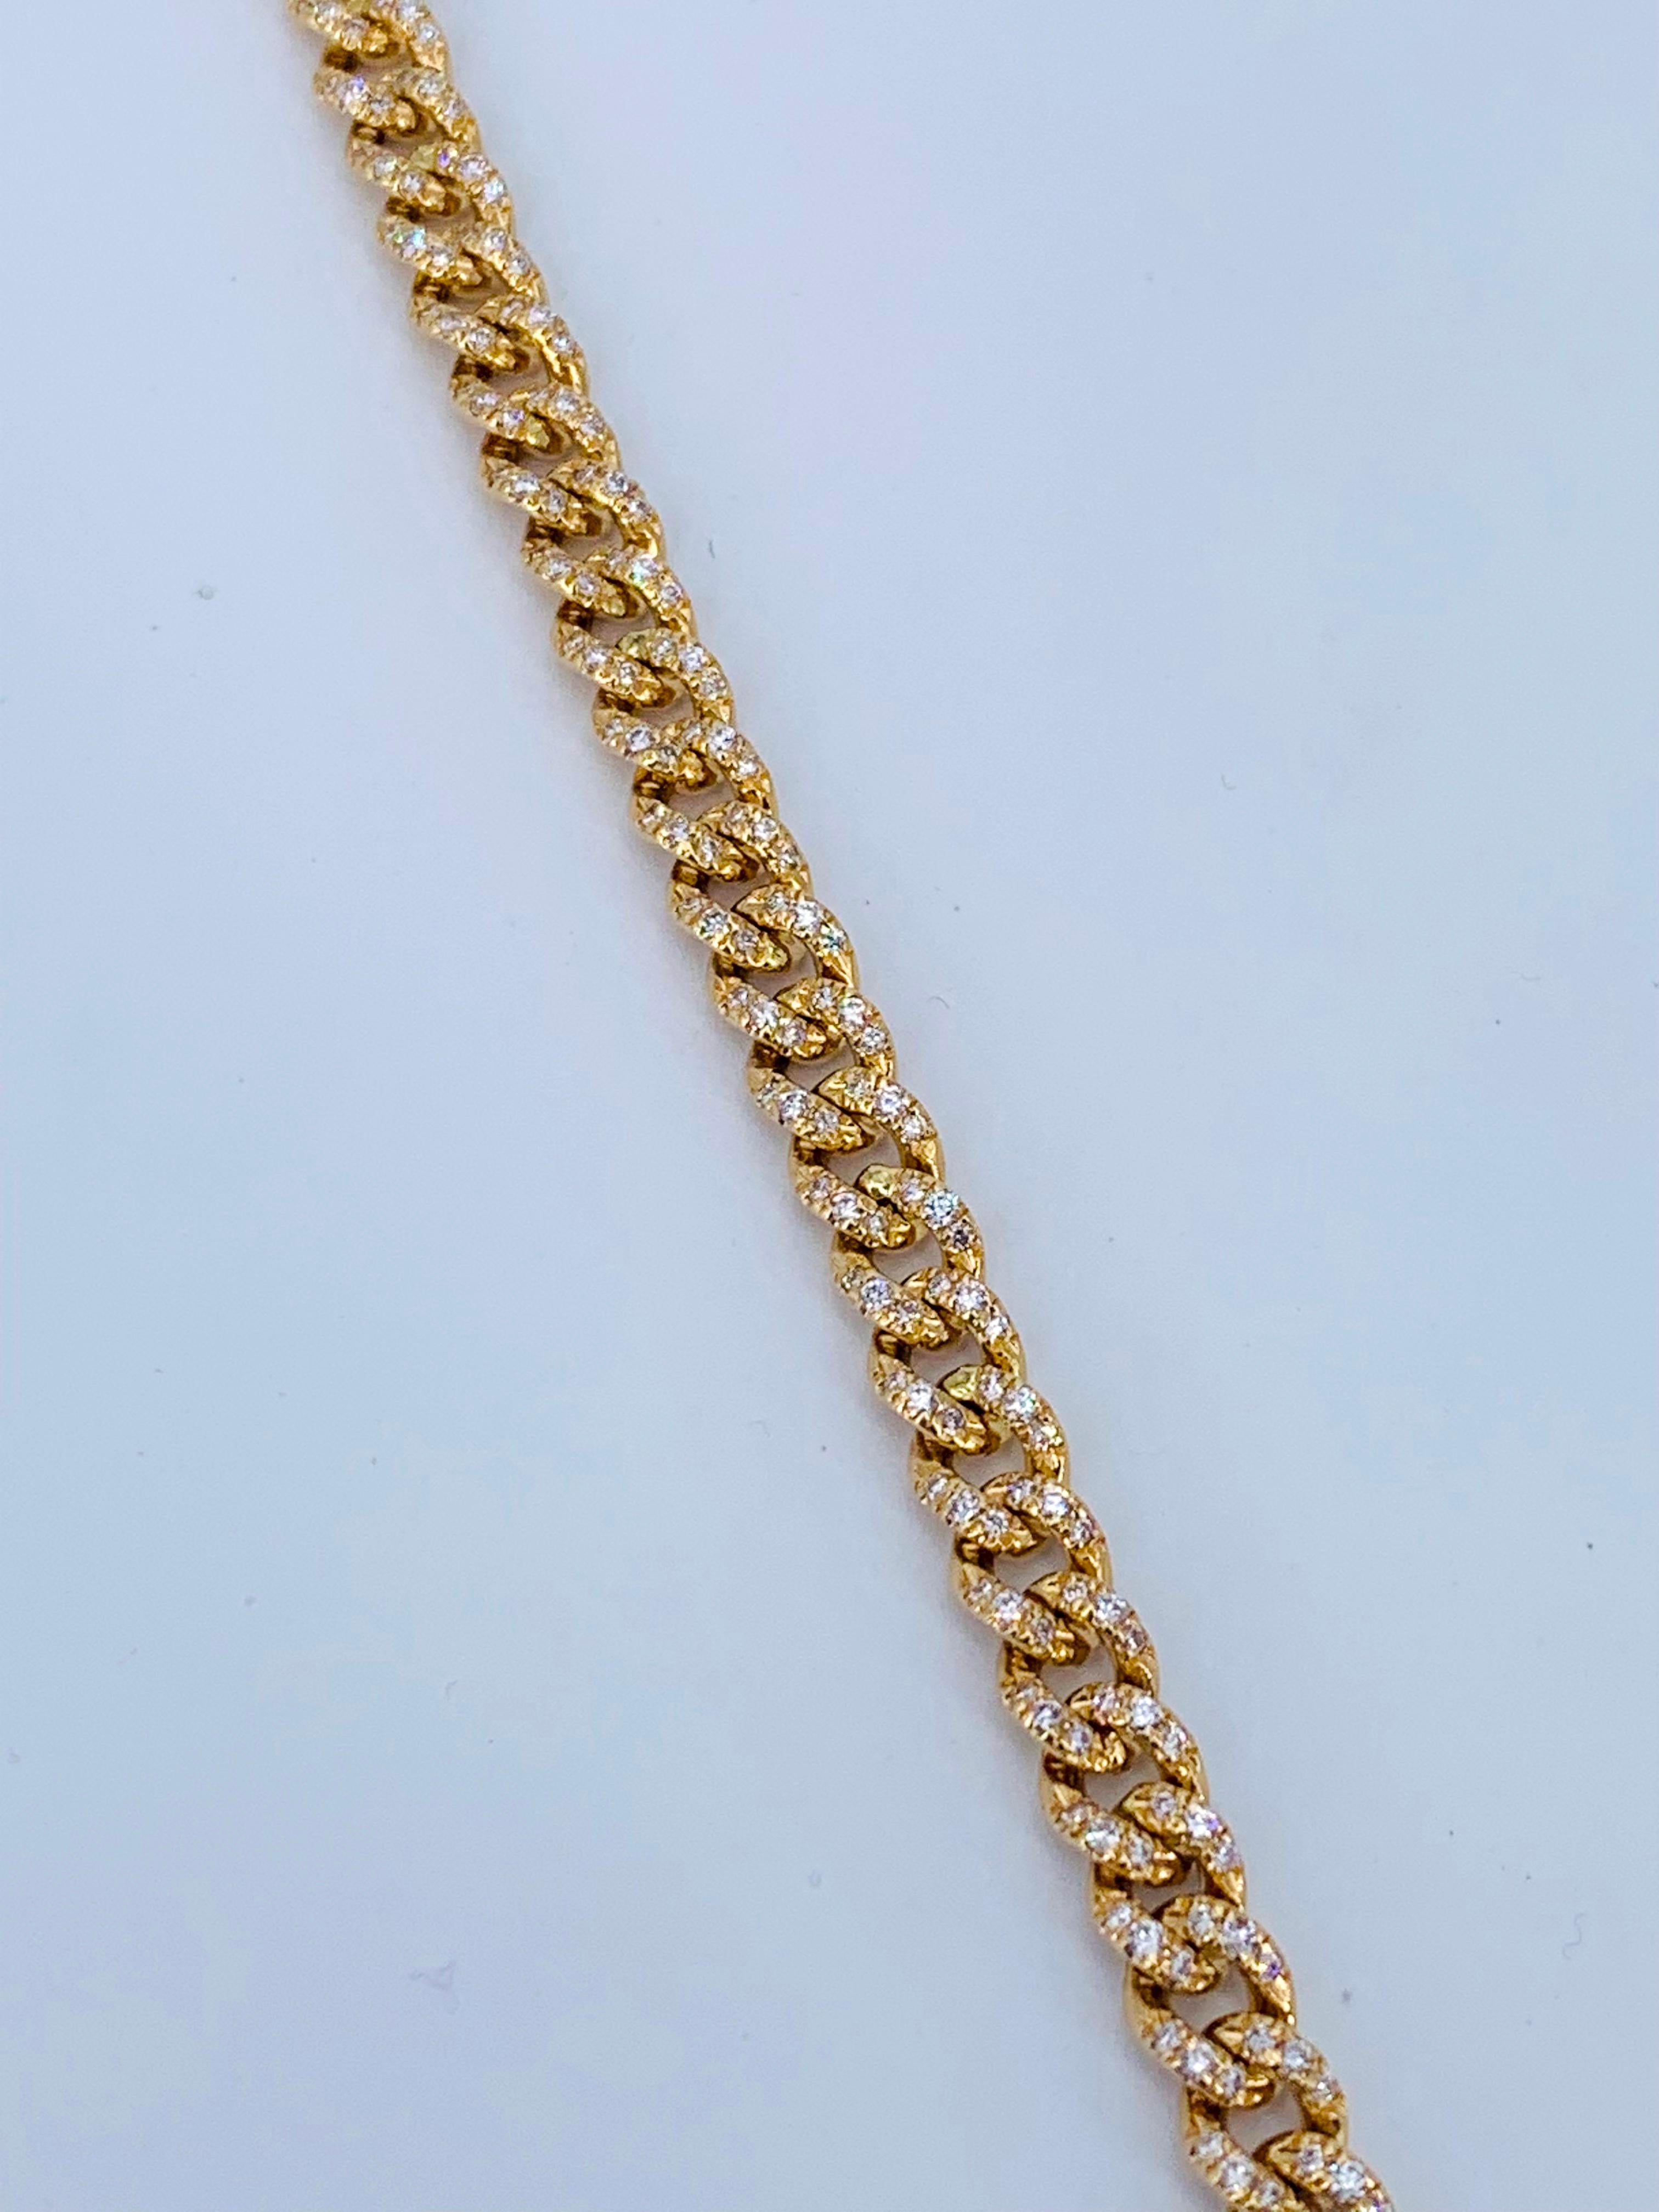 This fabulous Certified Yellow Gold 2.31 Carat Diamond Groumette Tennis Bracelet is unisex and fabulous on any wrist. 

Fully paved with 2.31 carats of diamonds, meaning one side of the linked chains is fully covered with diamonds & the other side